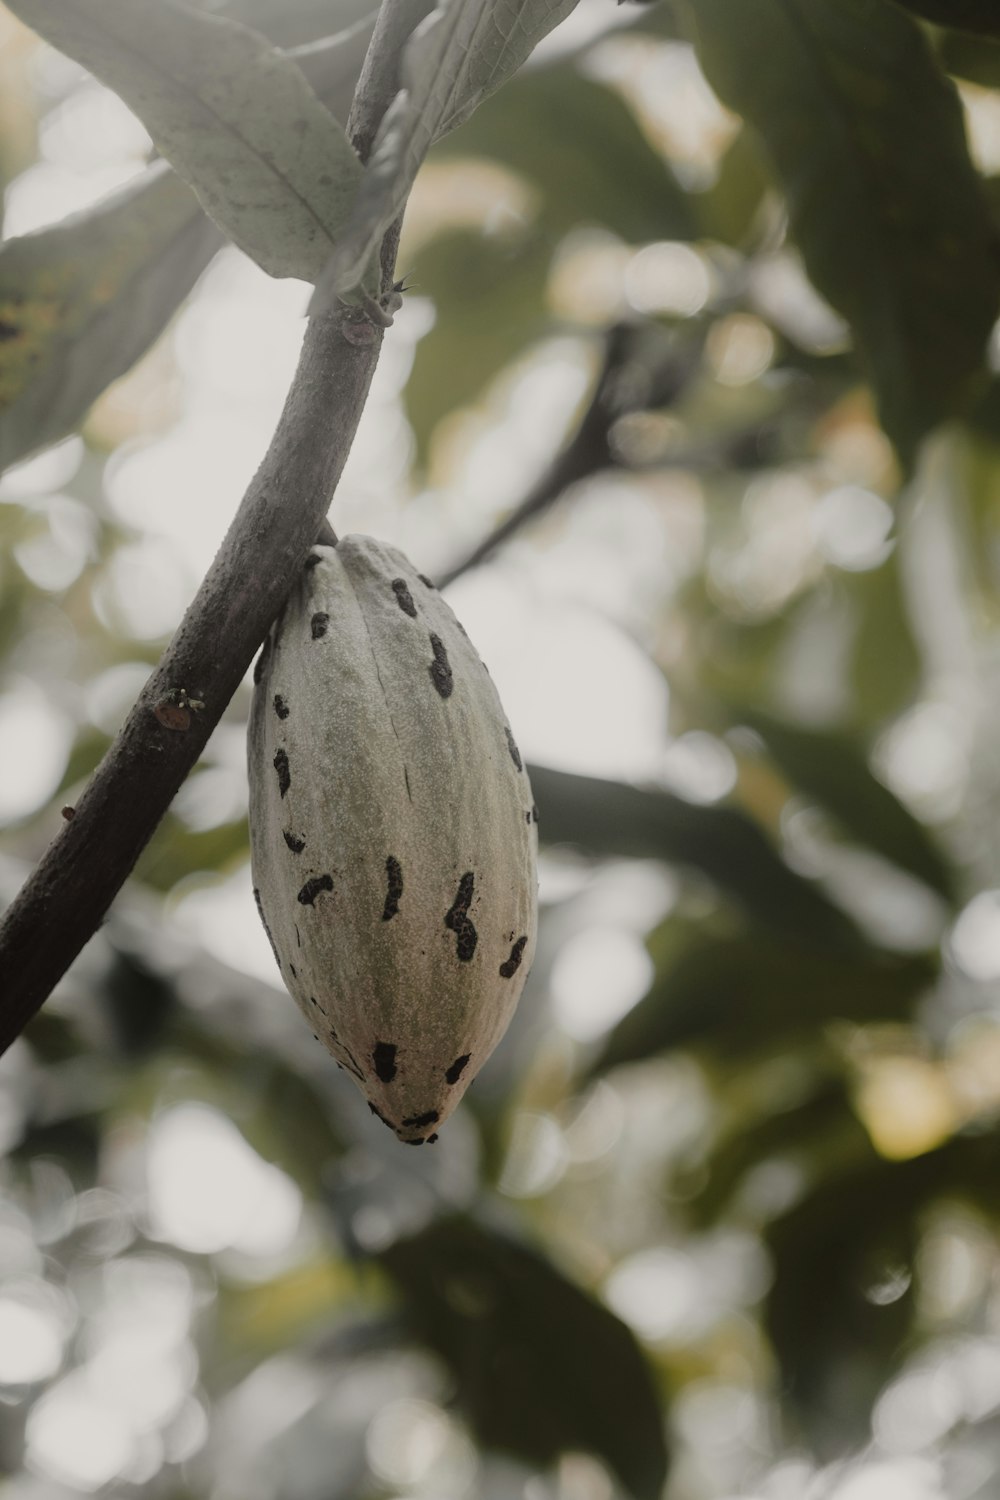 a seed pod hanging from a tree branch